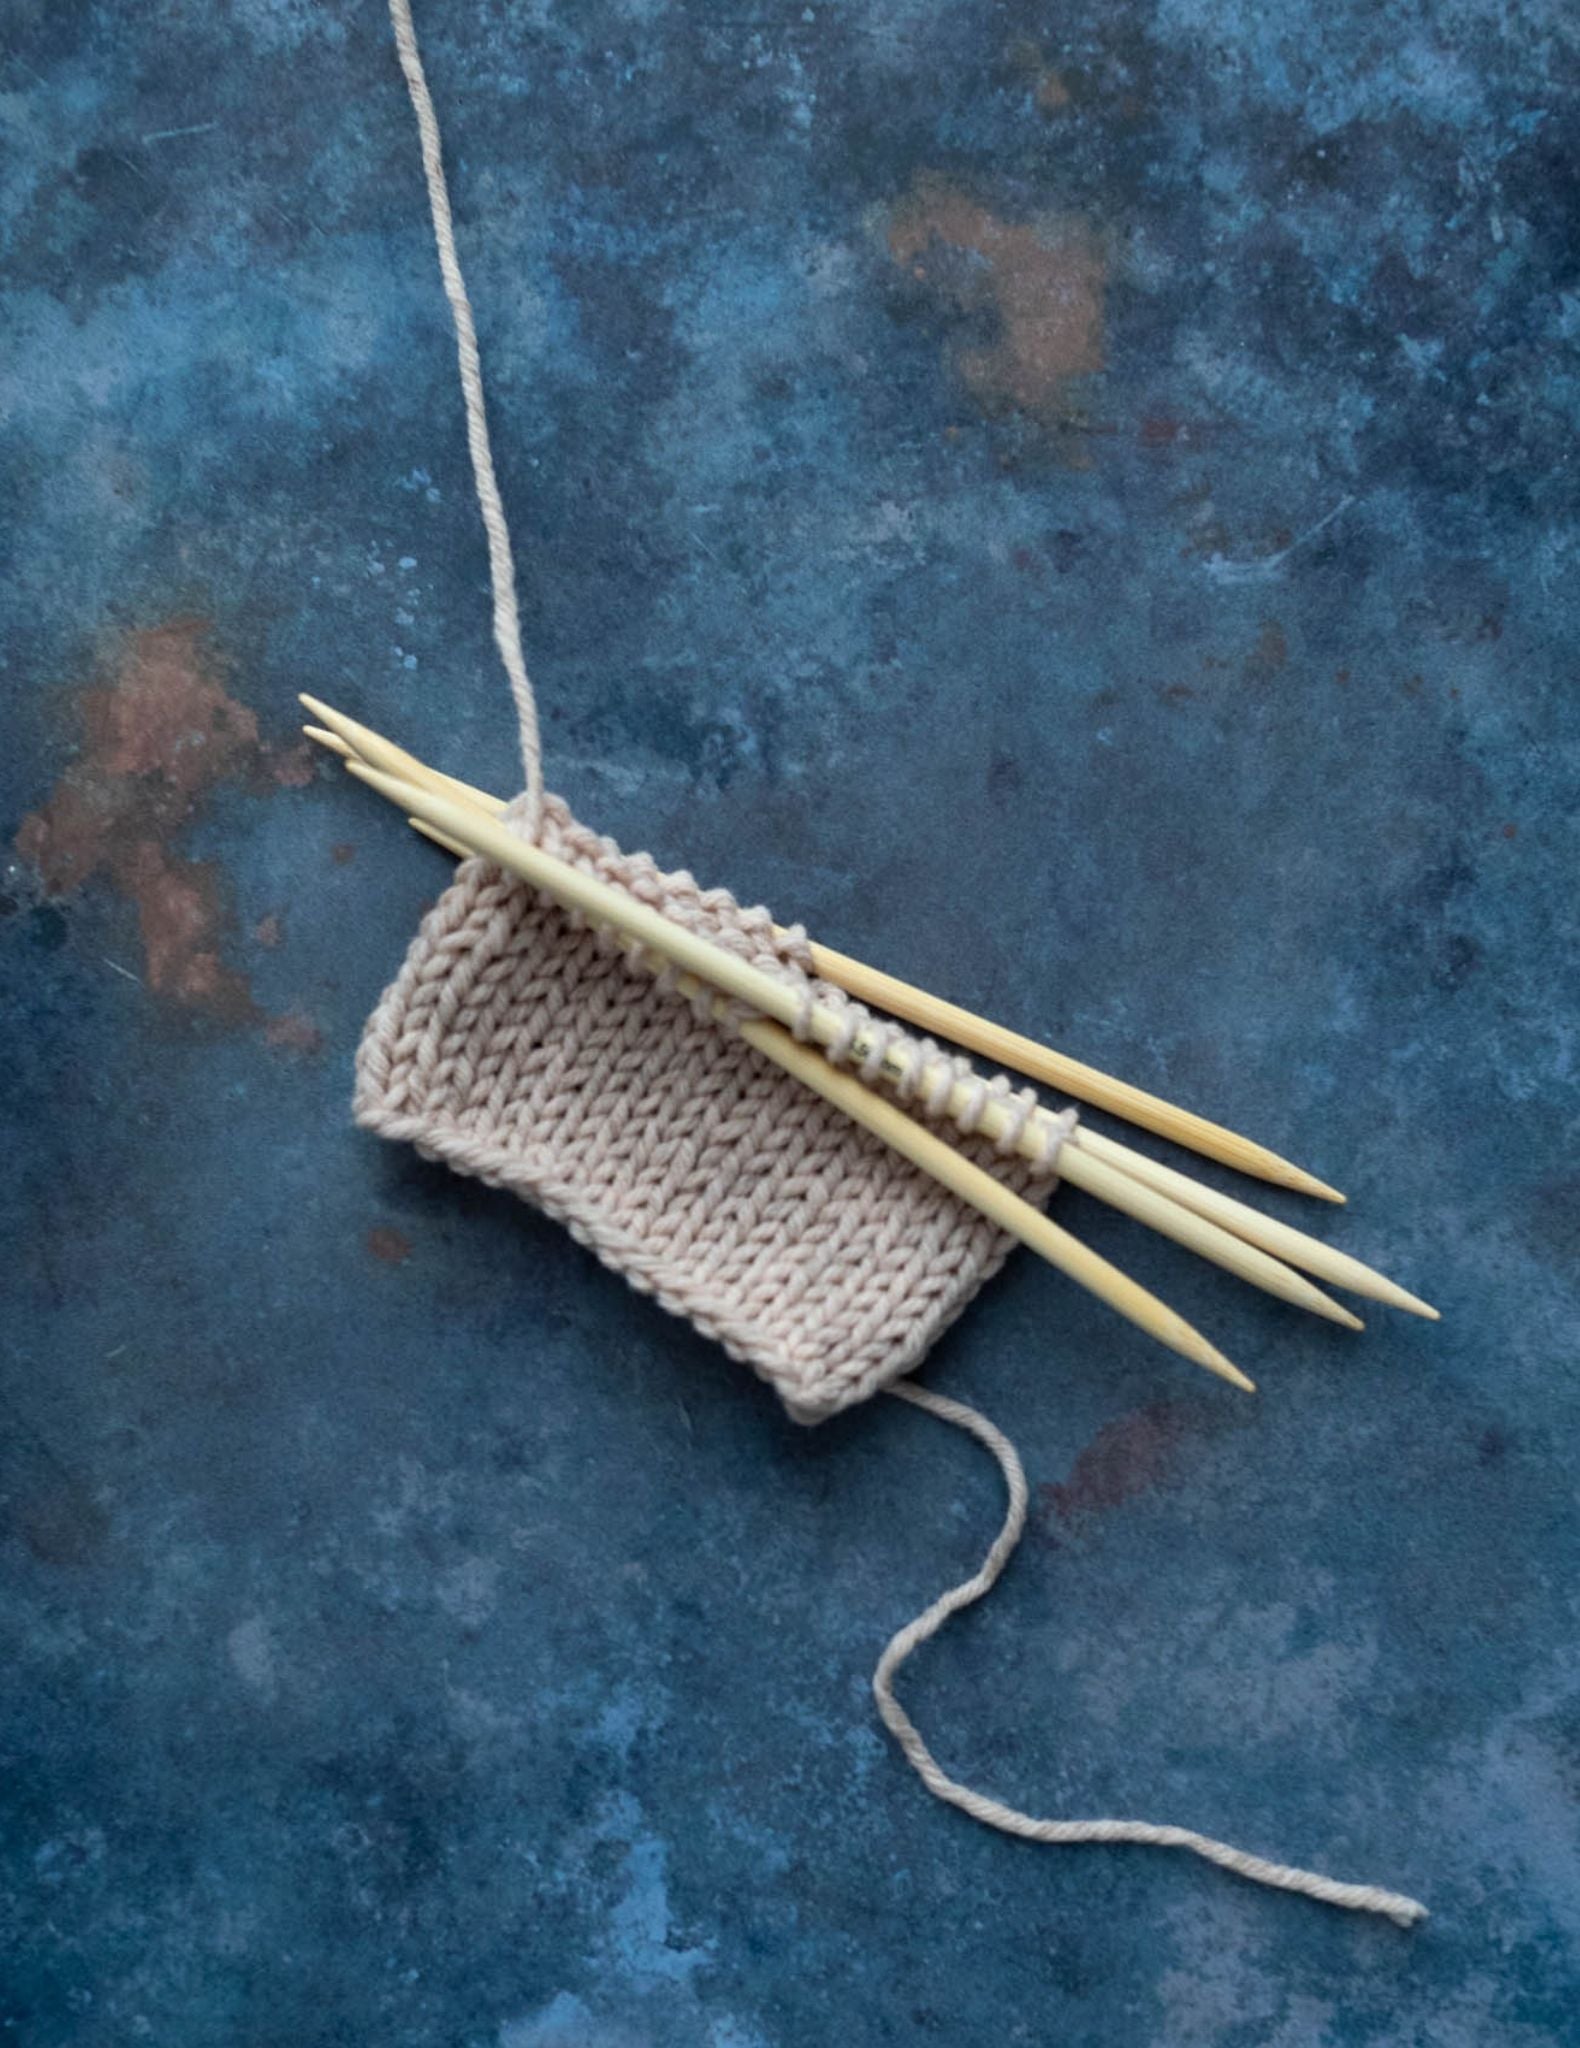 How to knit in the round with double-pointed needles?, by The Mindful  Collection